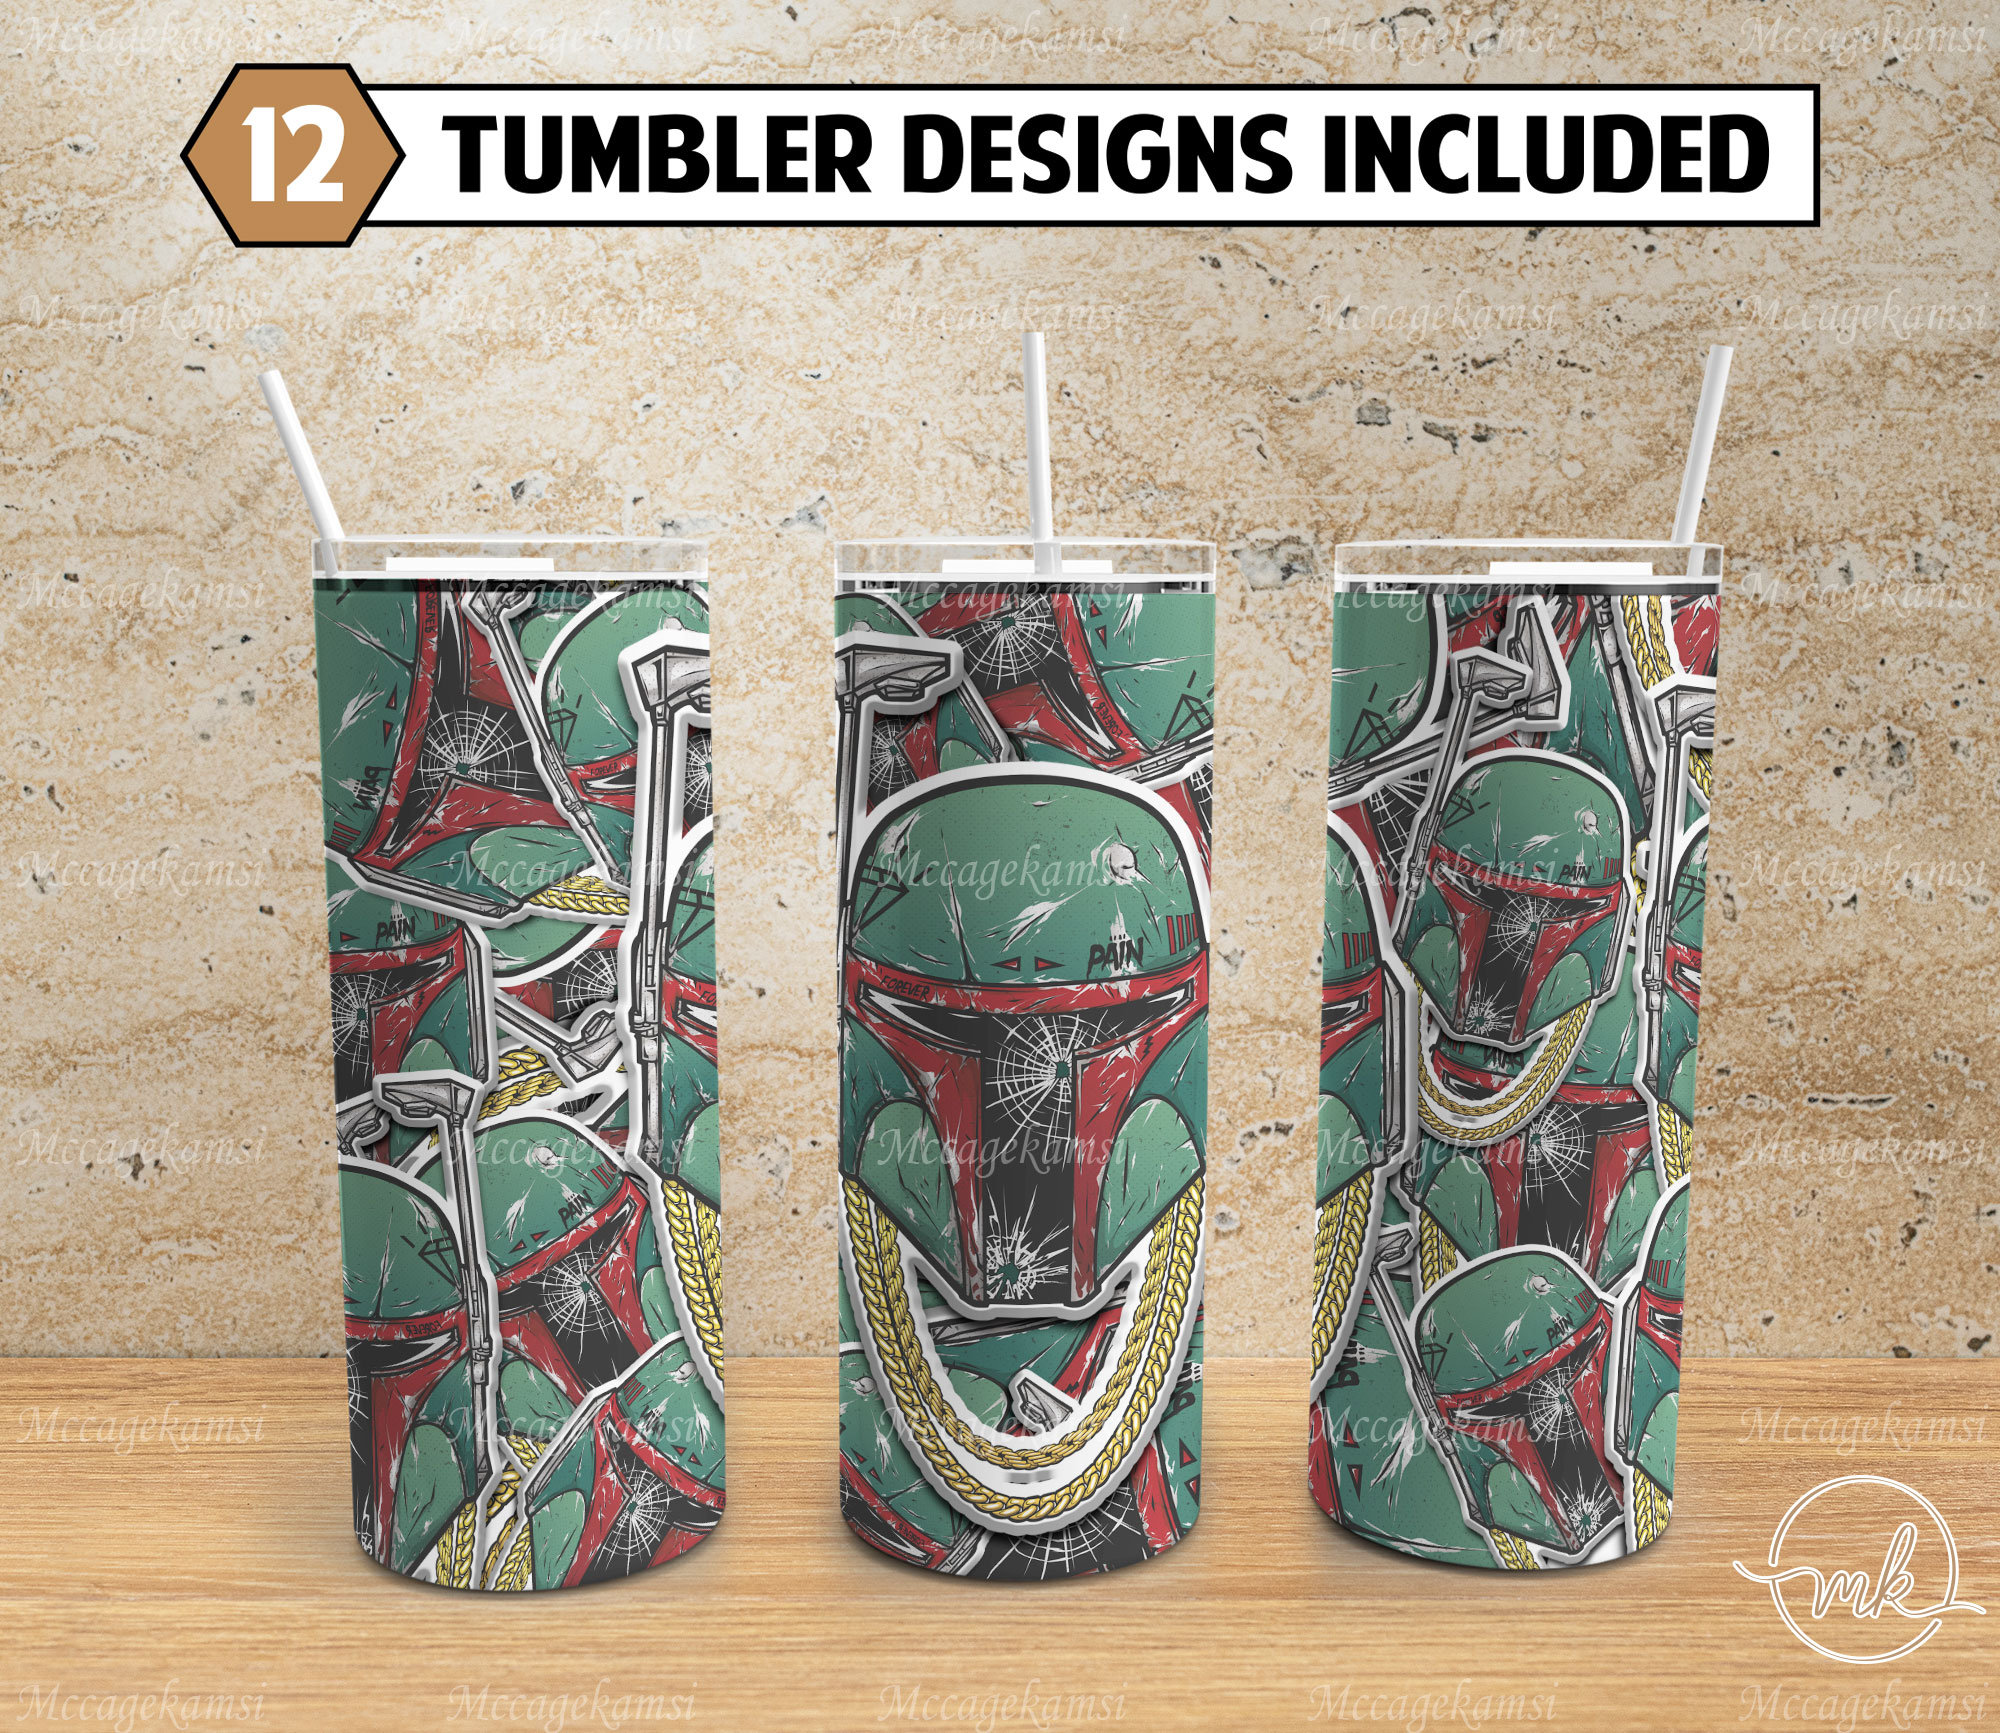 Simple Modern Star Wars Boba Fett Insulated Tumbler Cup with Flip Lid and  Straw Lid | Gifts for Wome…See more Simple Modern Star Wars Boba Fett